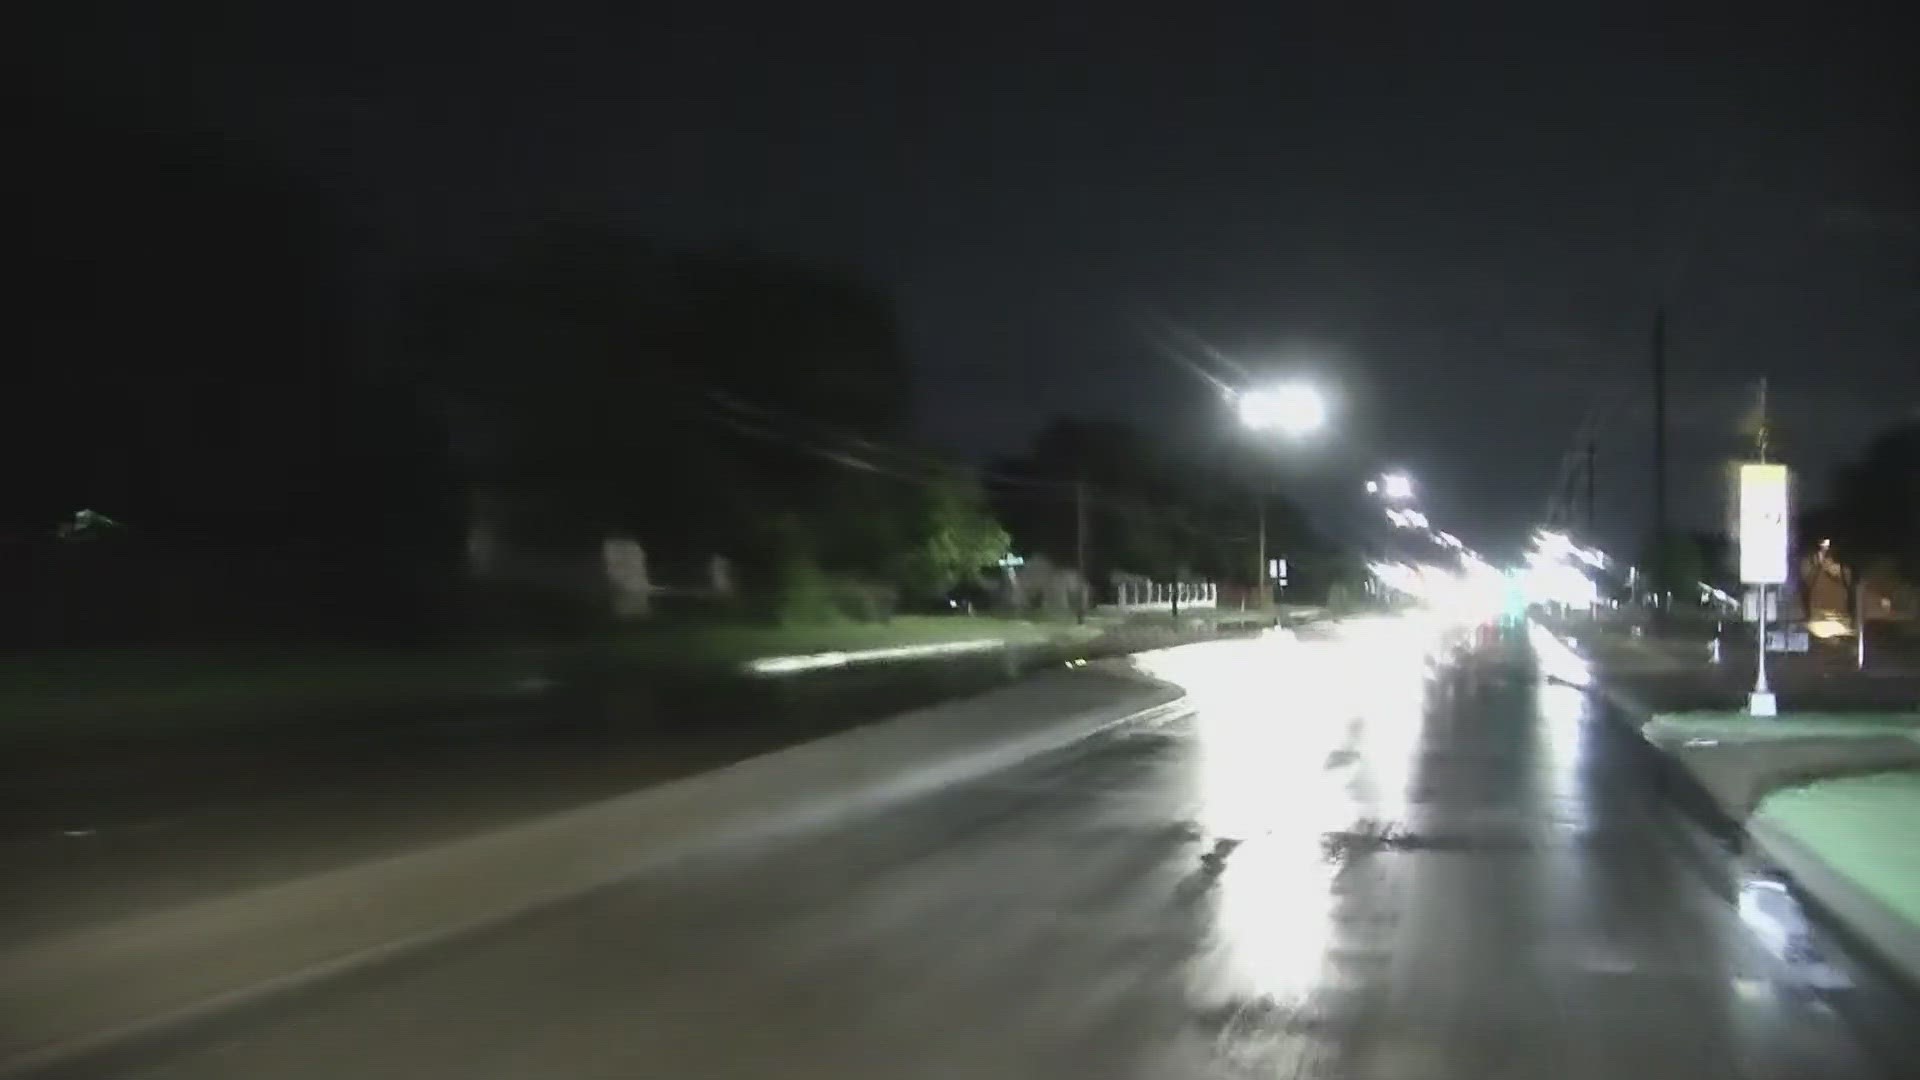 WFAA Daybreak's give a look at weather and road conditions as of about 5 a.m. Tuesday, April 9.